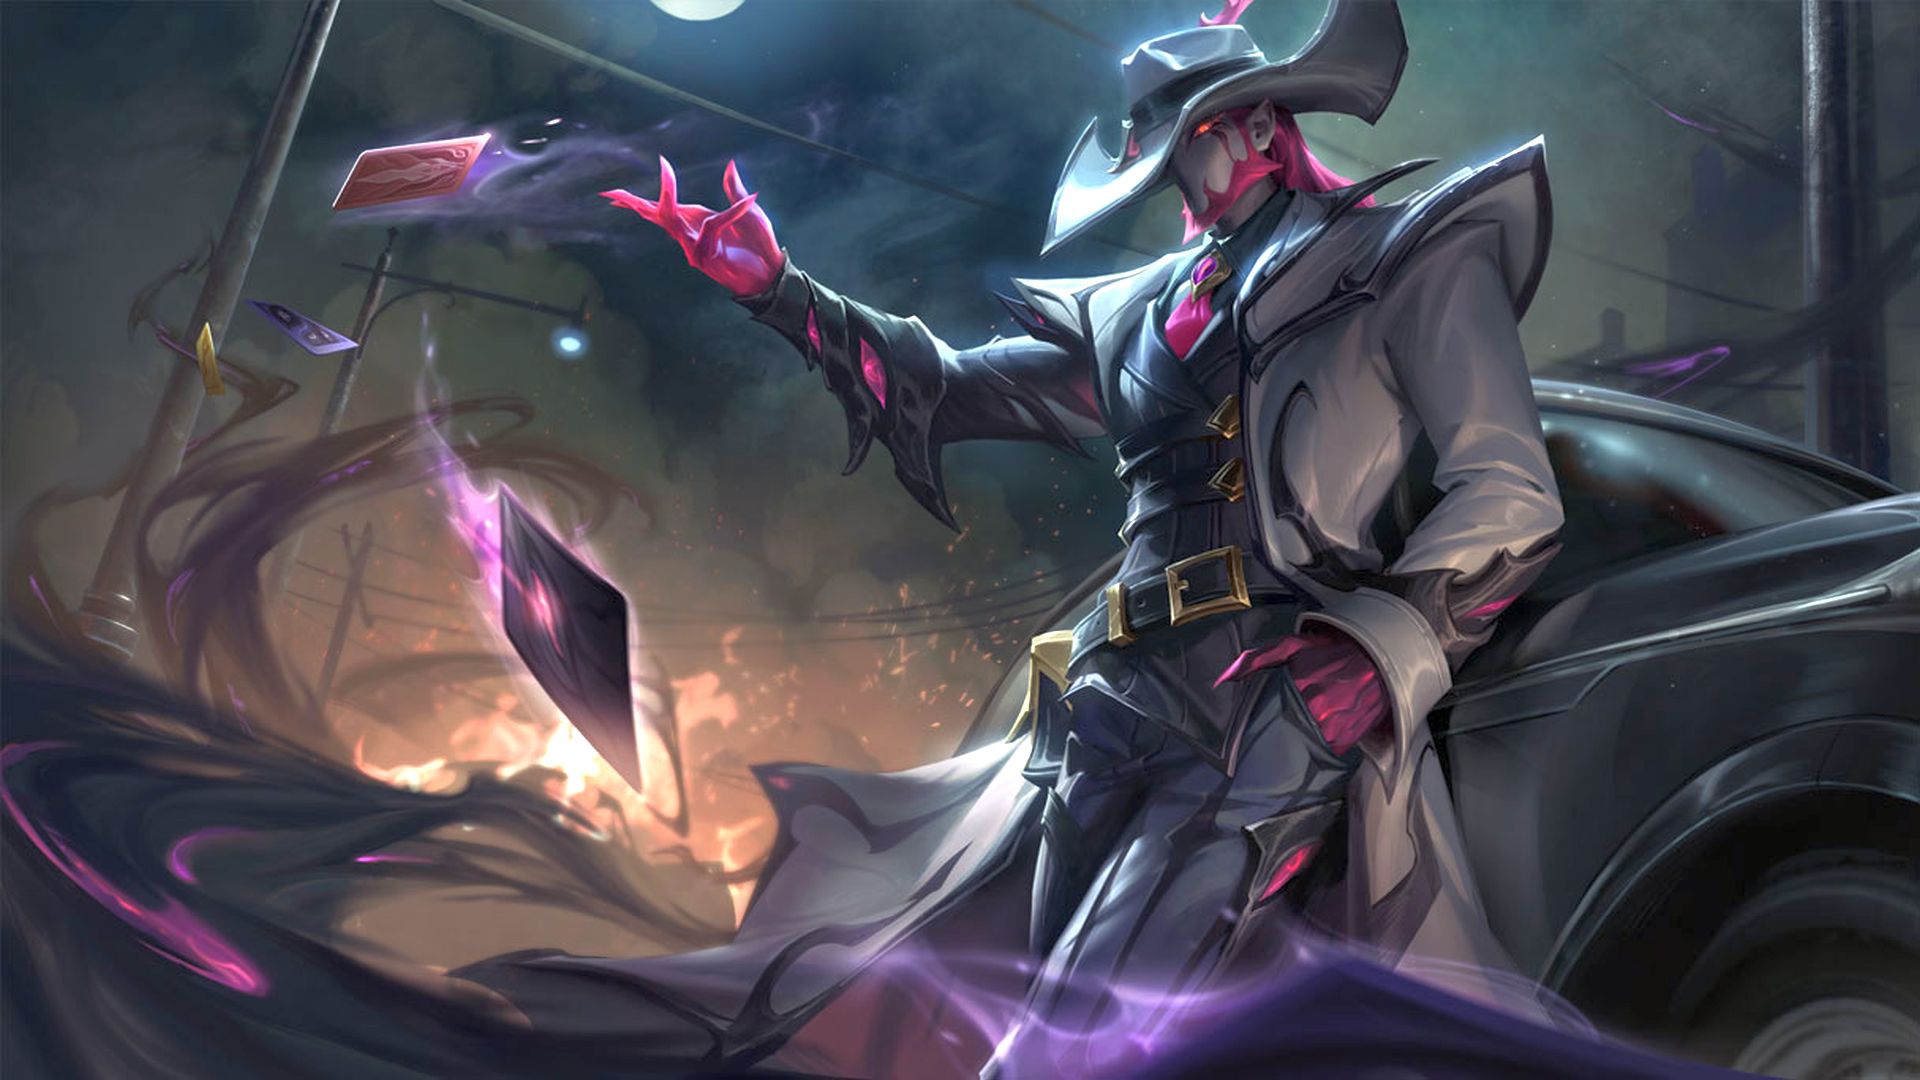 League of Legends New Skins on PBE patch 11.17